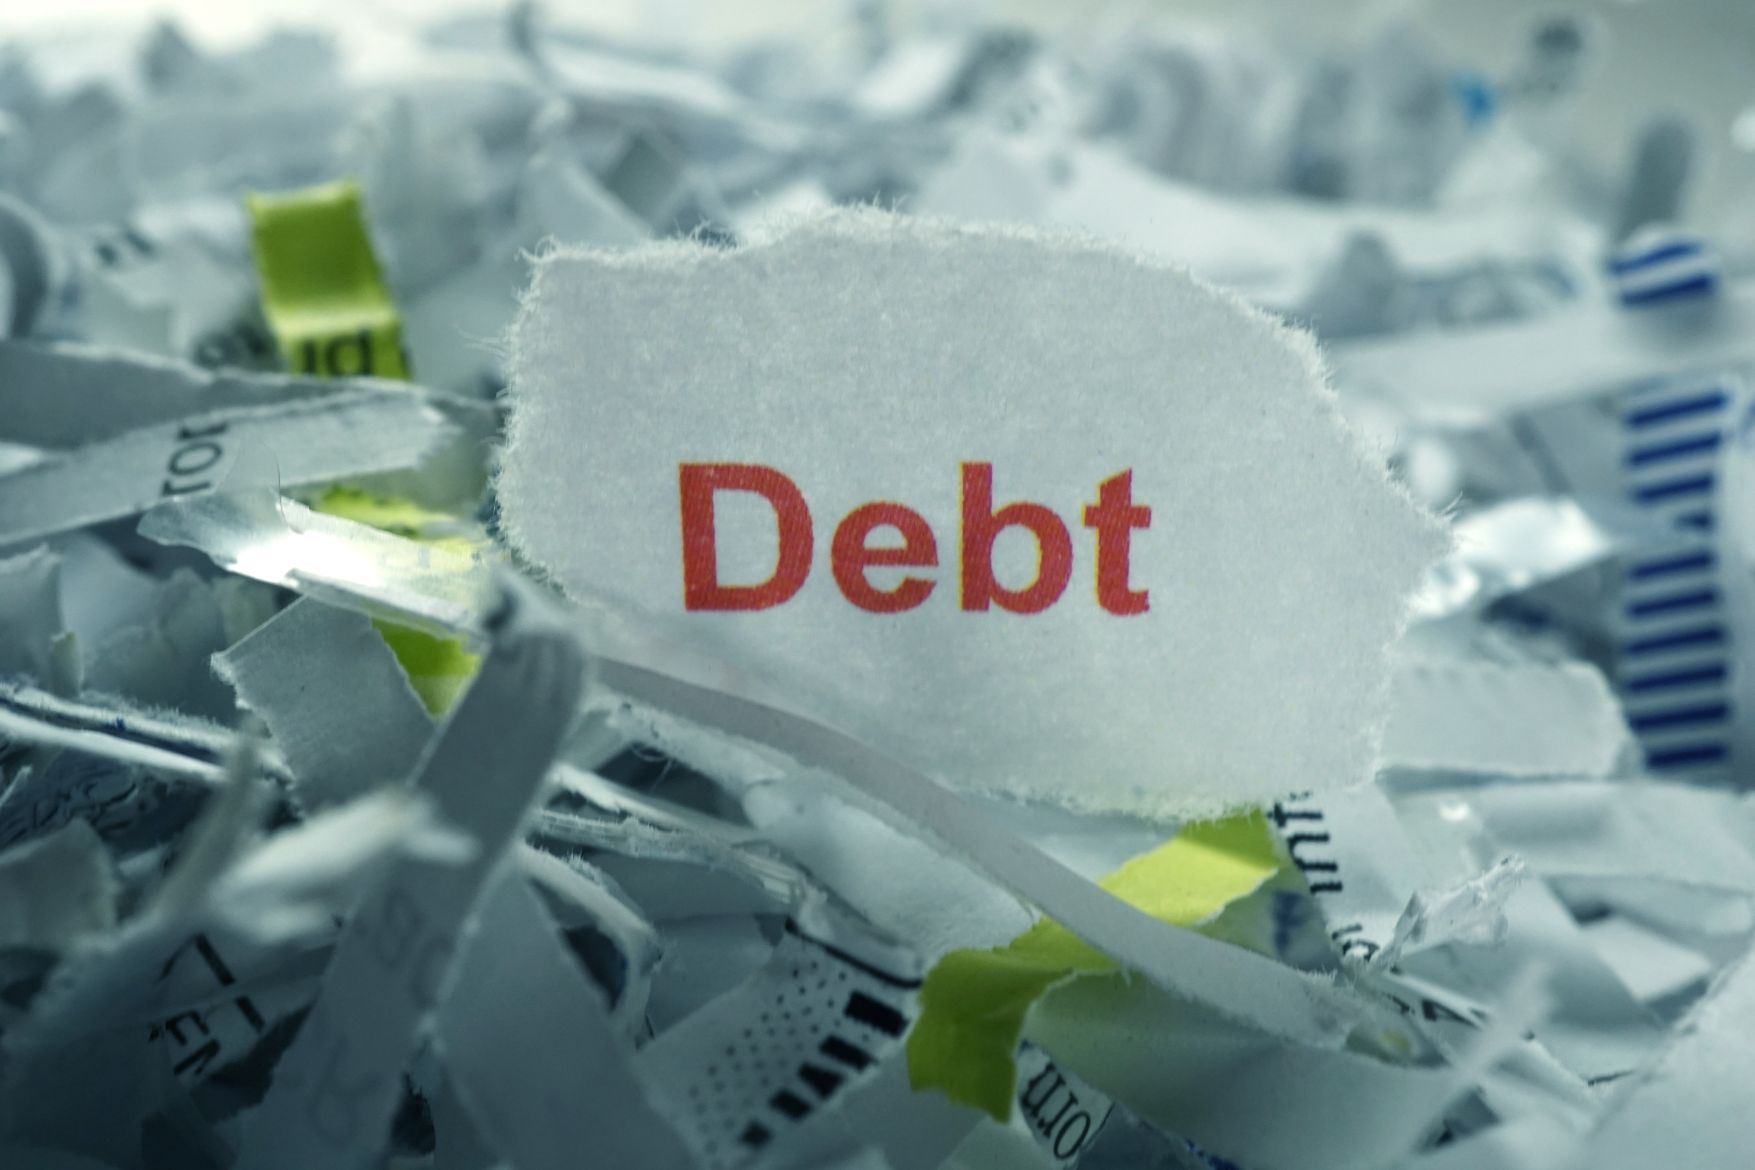 Debt Recycling Demystified: A Proactive Approach to Financial Freedom